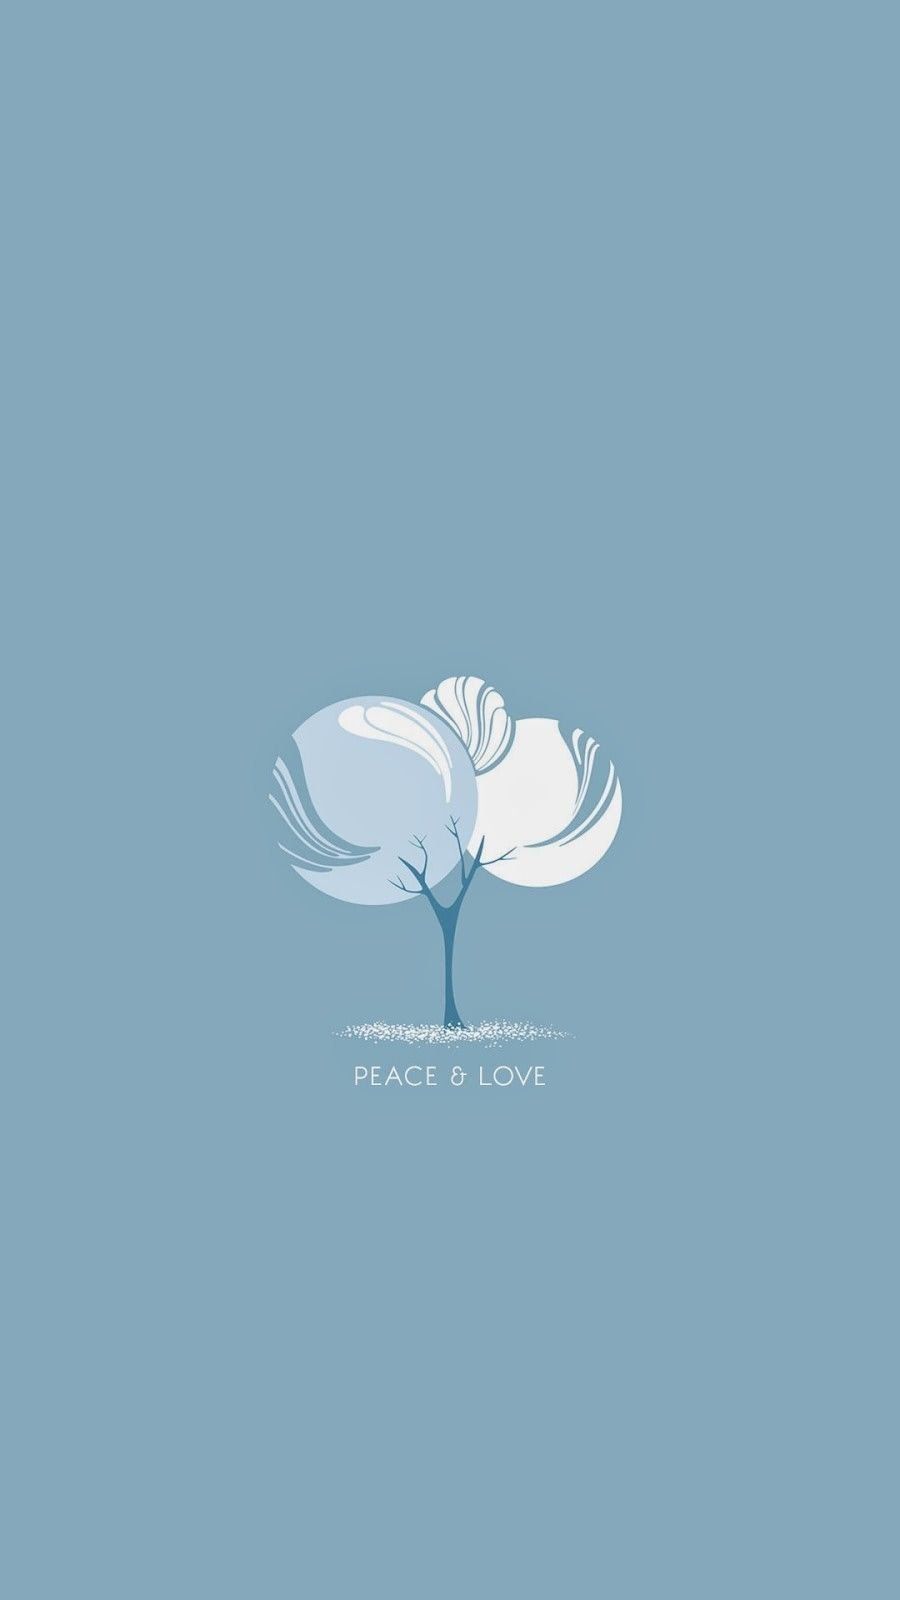 IPhone wallpaper with a tree and the words Peace and Love - Peace